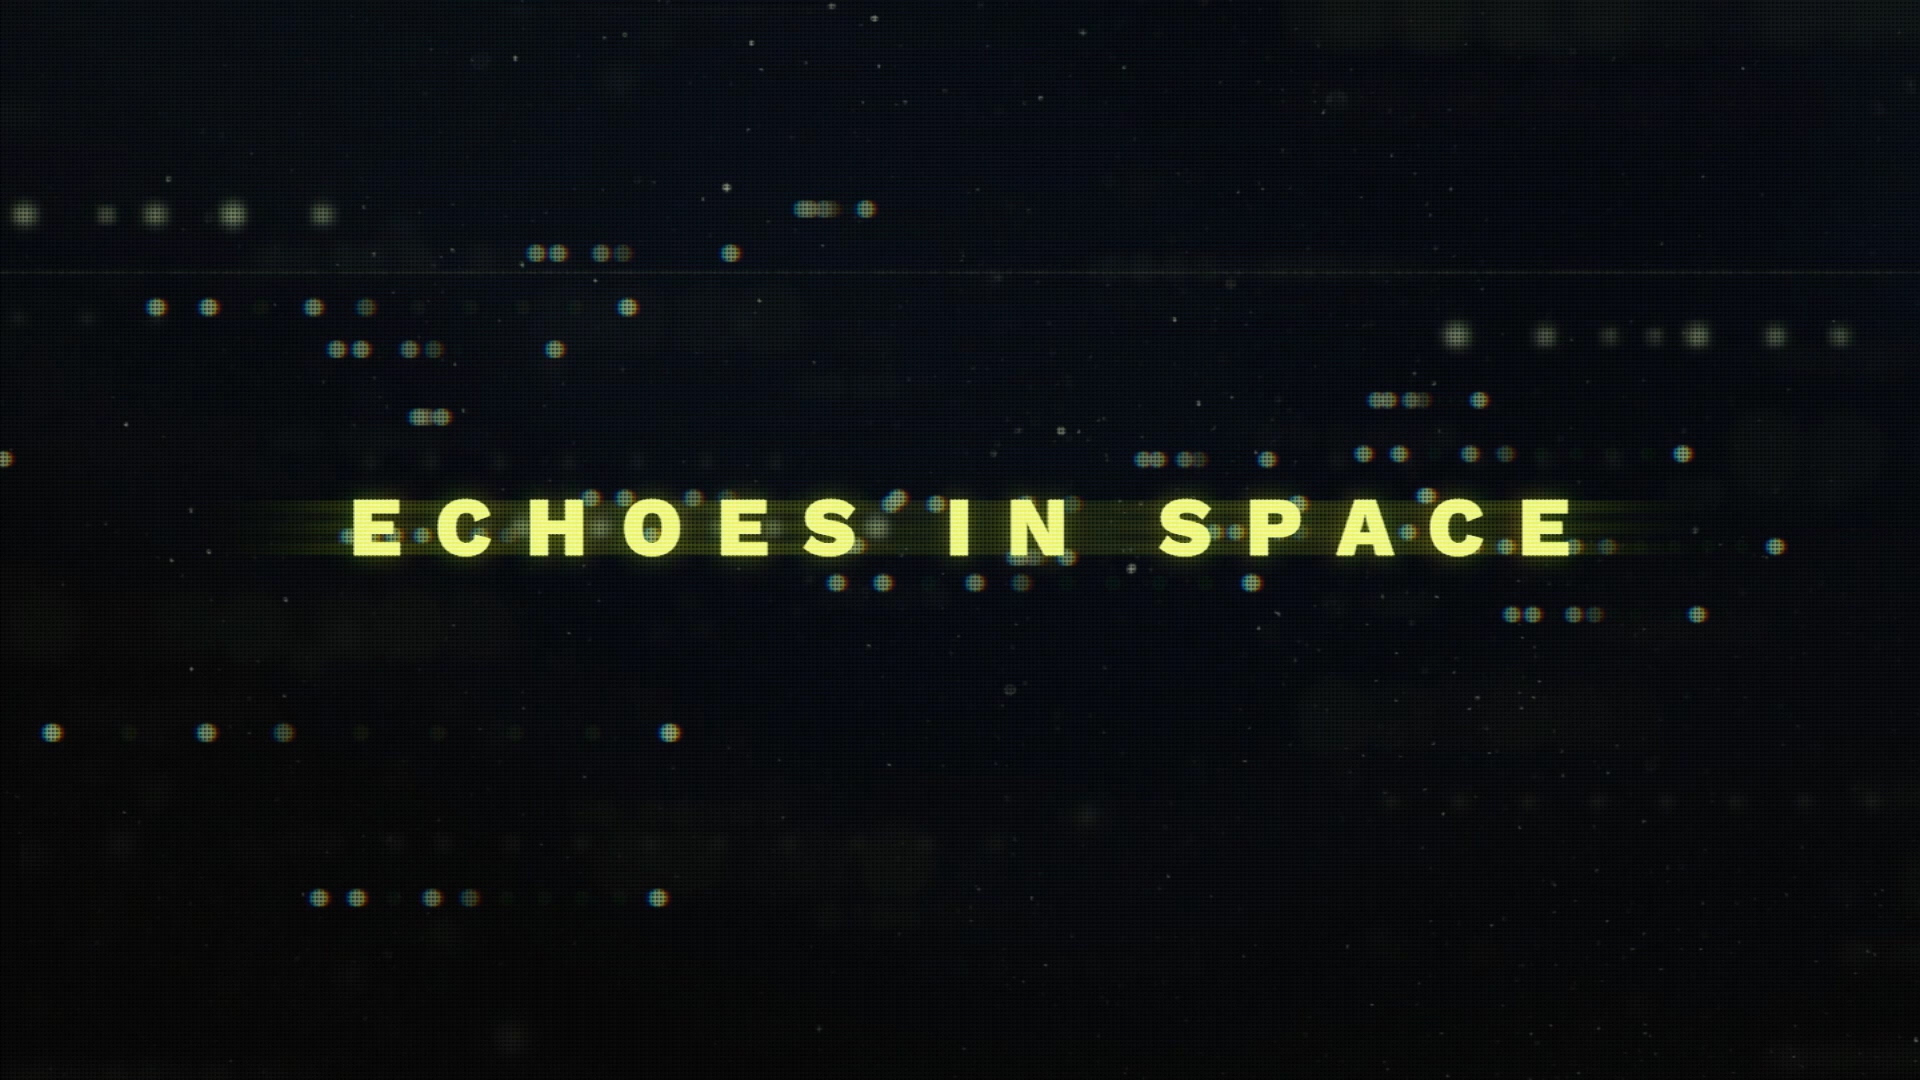 Echoes in space